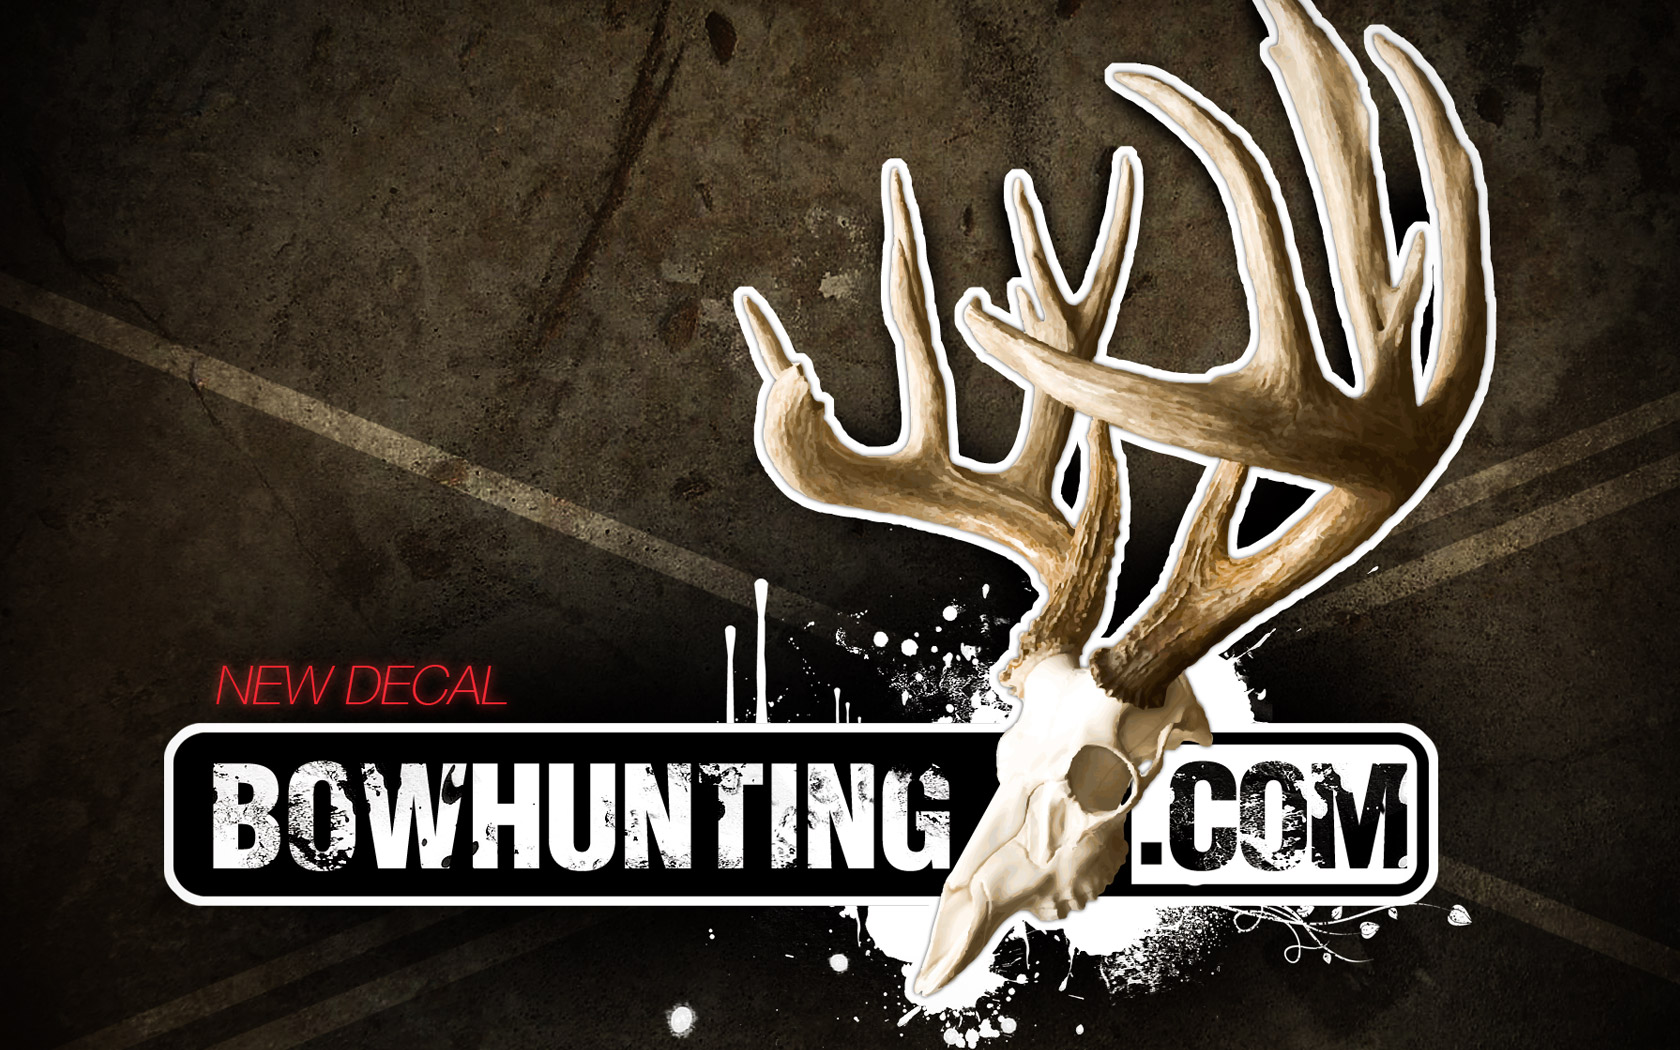 Bowhunting Background Images